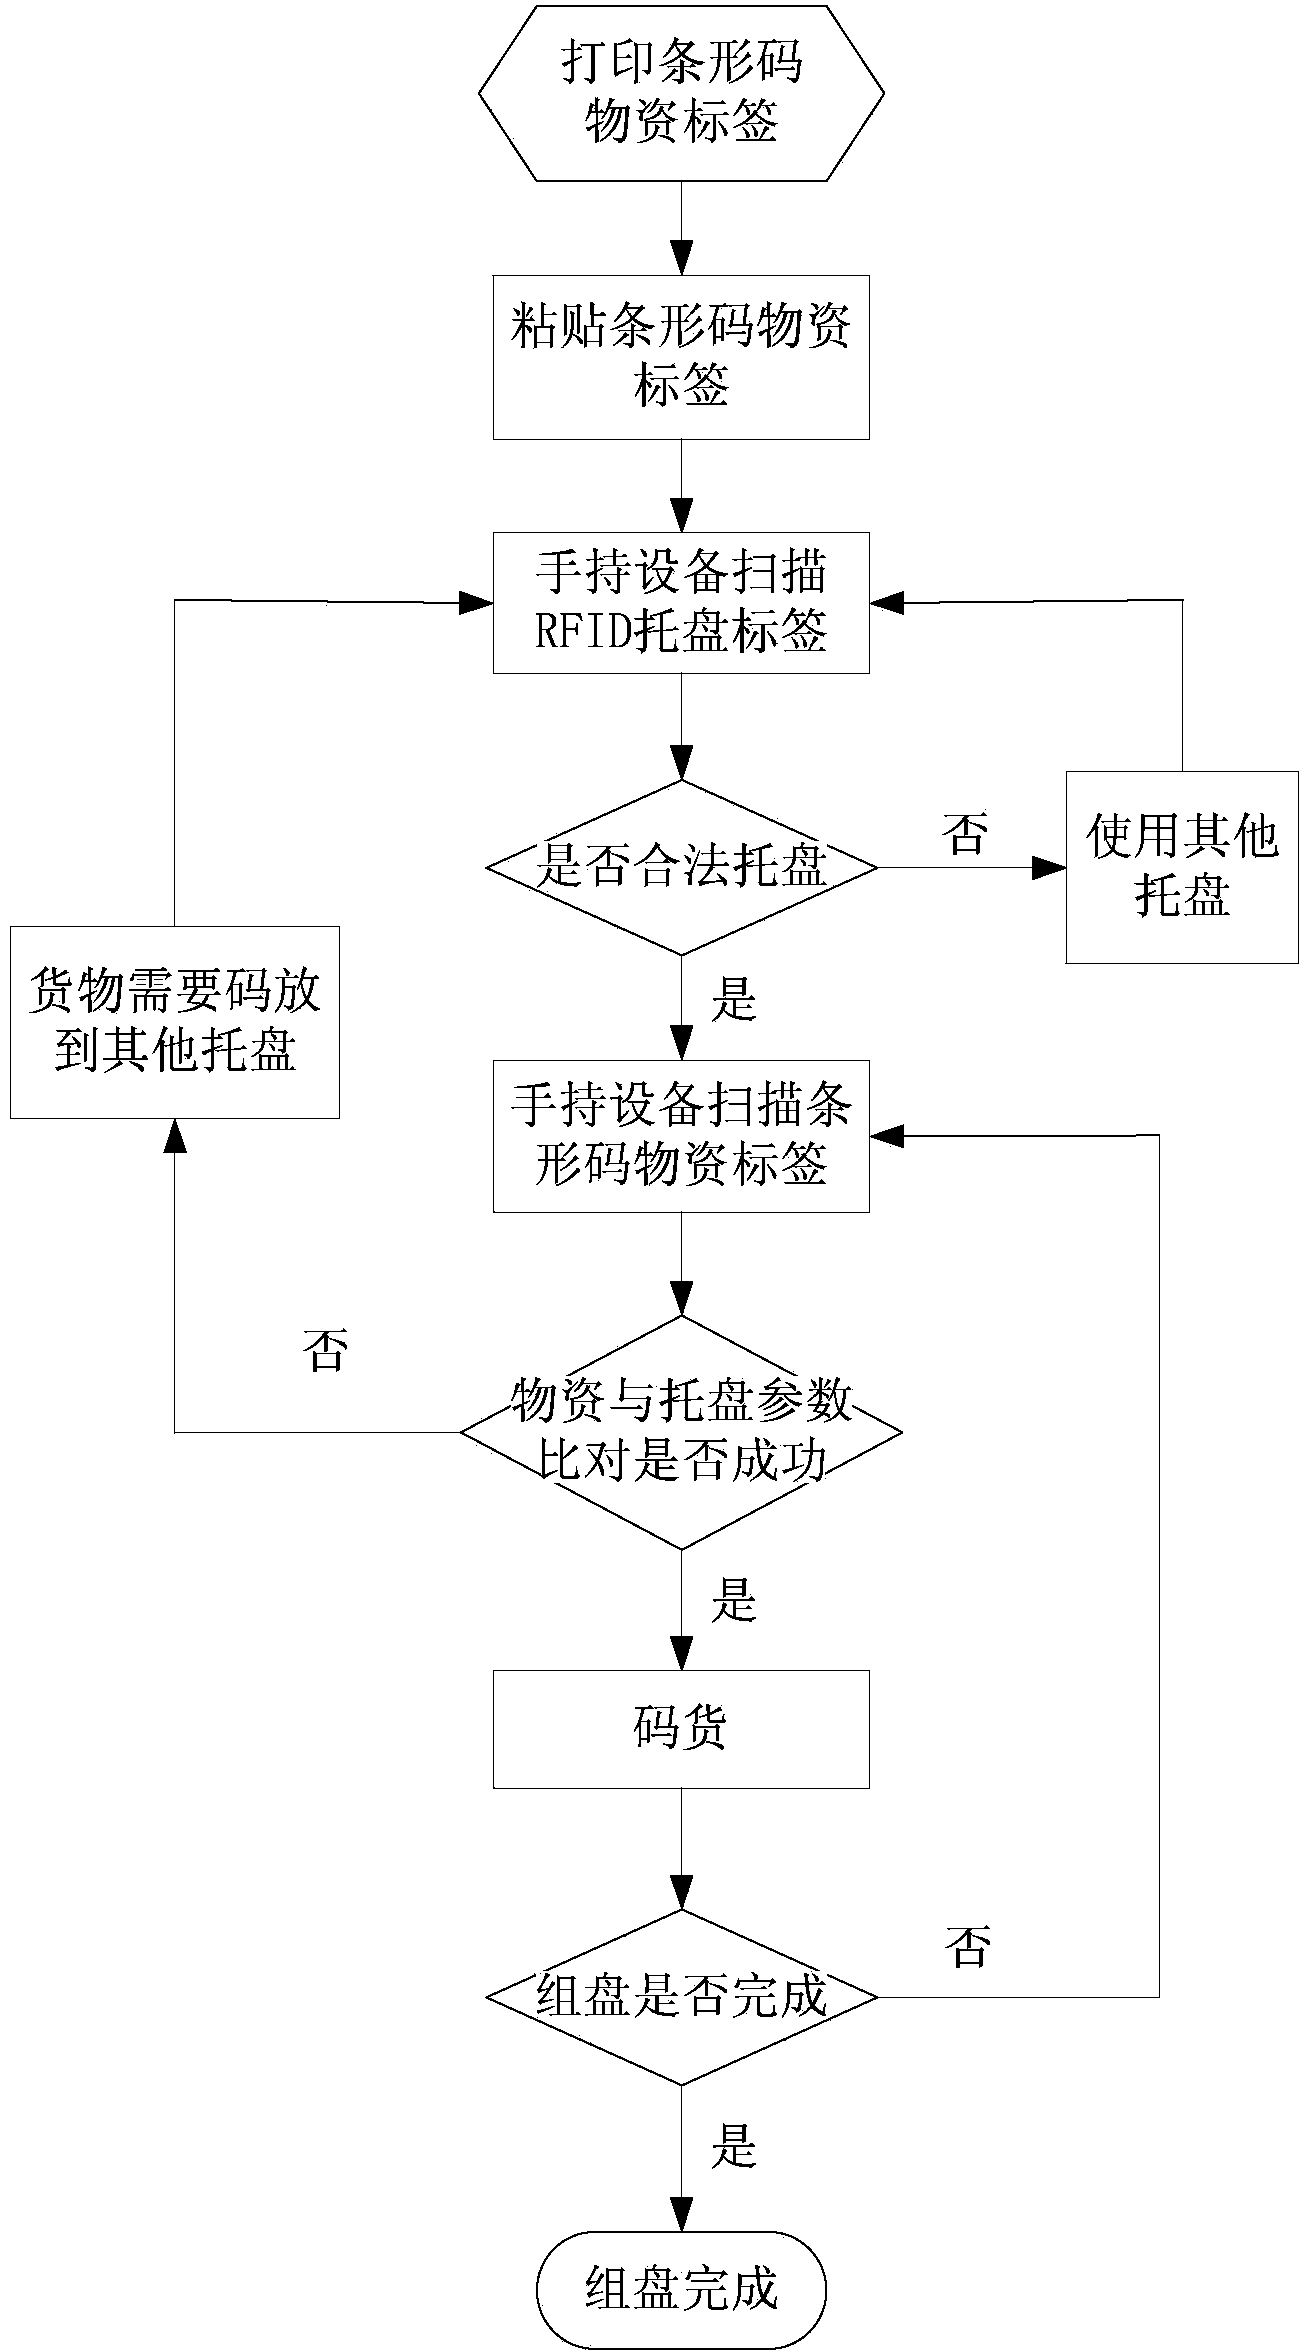 Mobile warehouse tray combining operation method based on handheld device